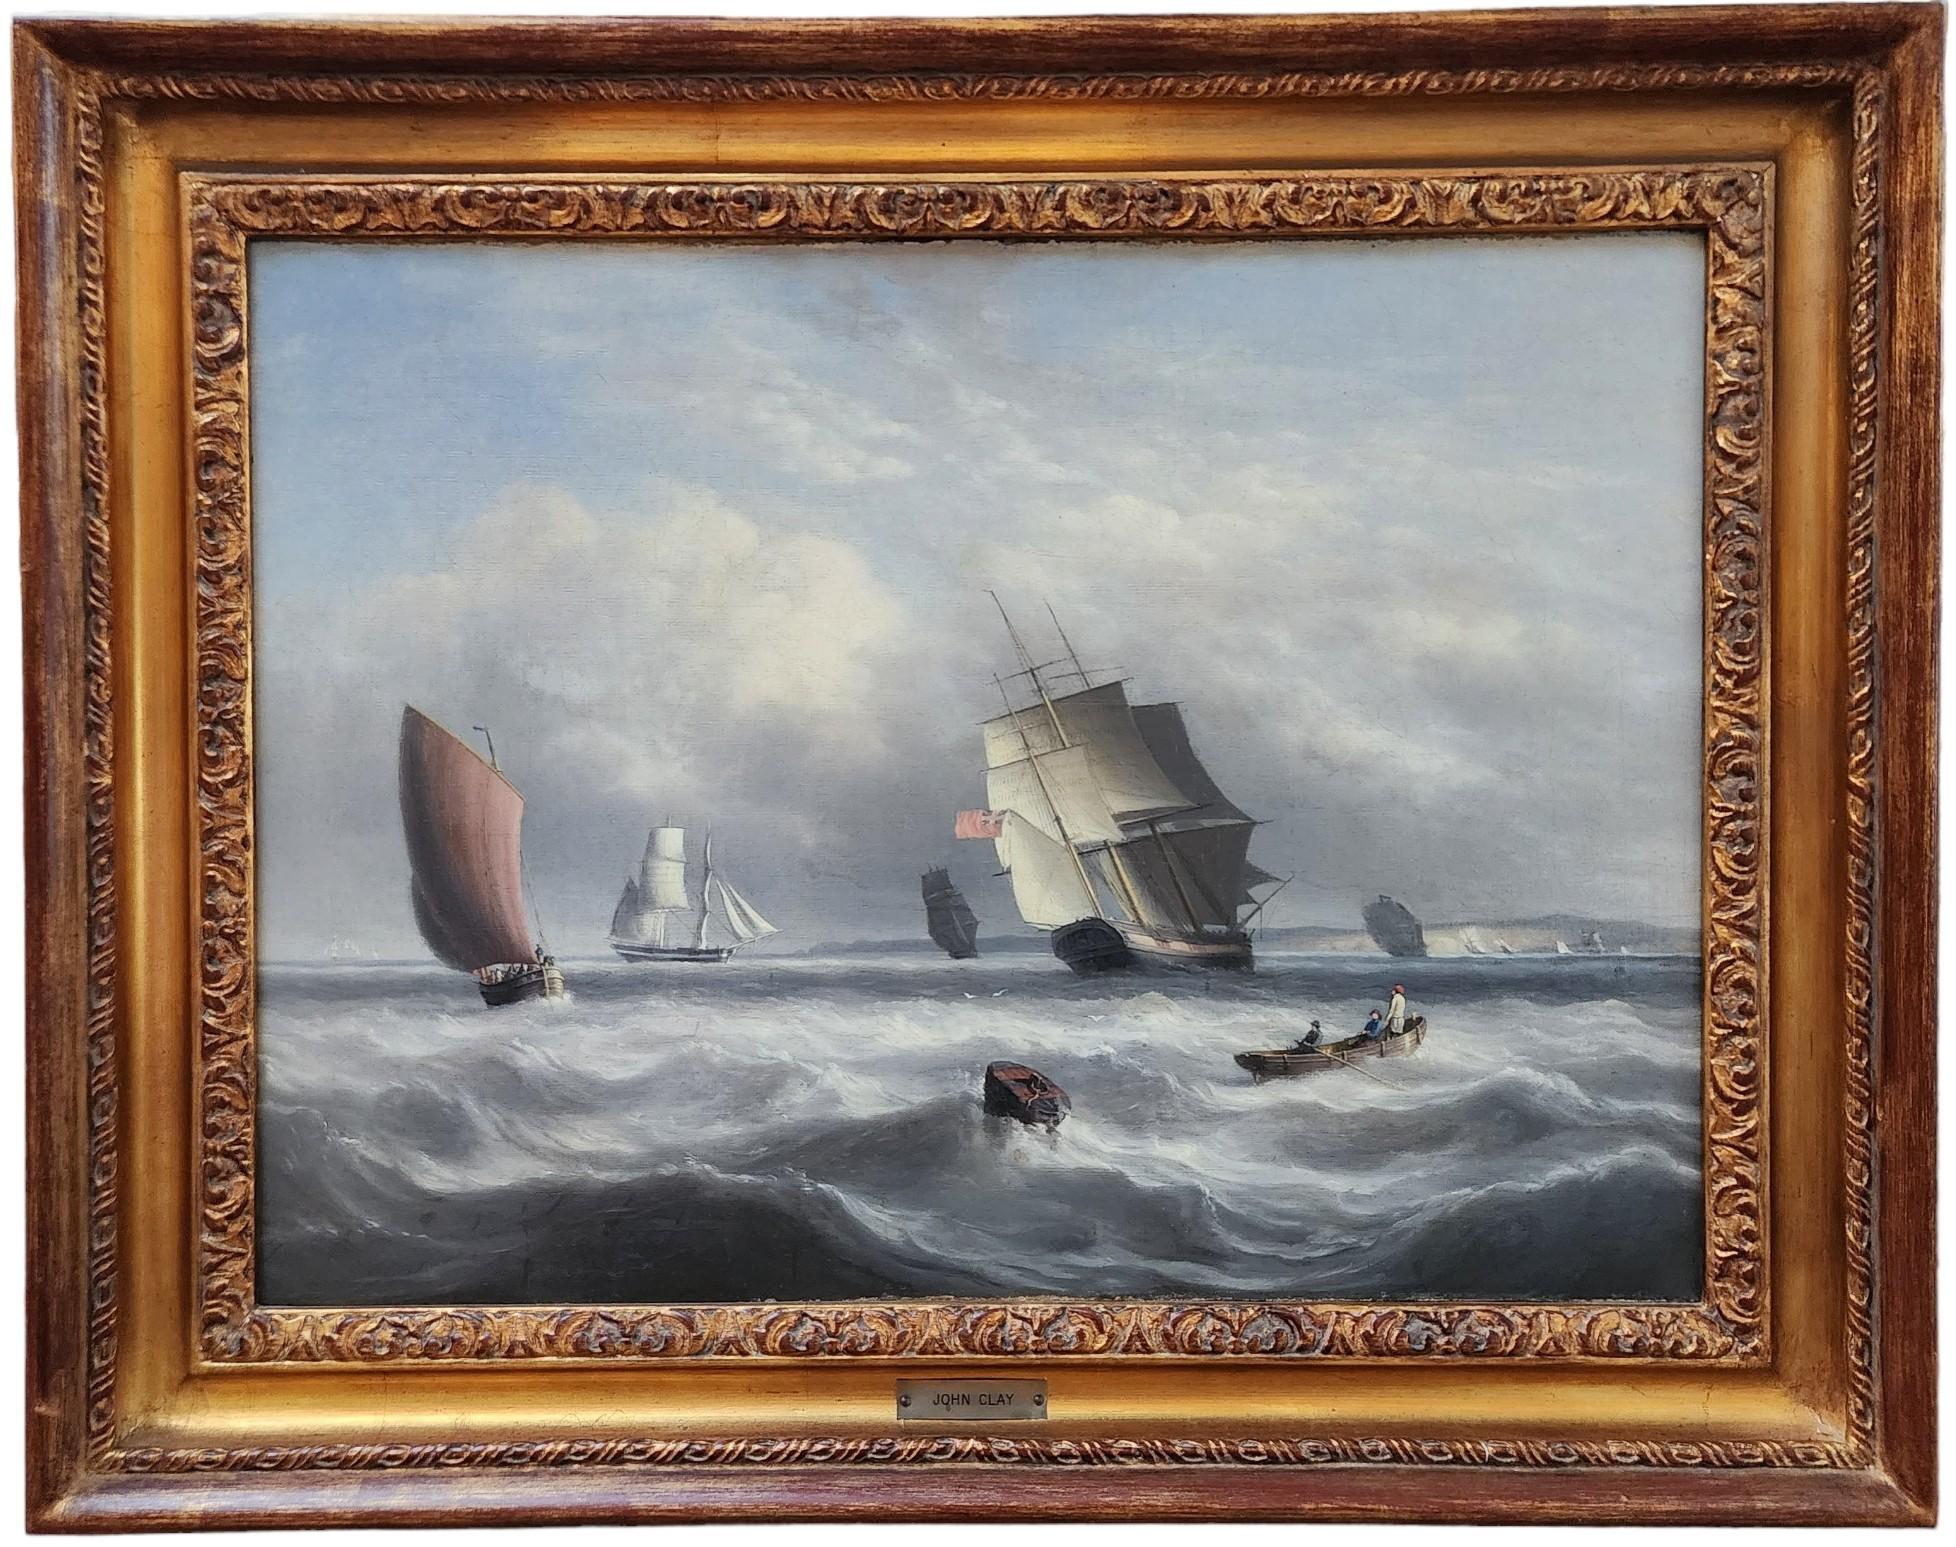 Merchant Vessel in The English Channel, British Seascape, Antique Maritime  - Painting by John Clay